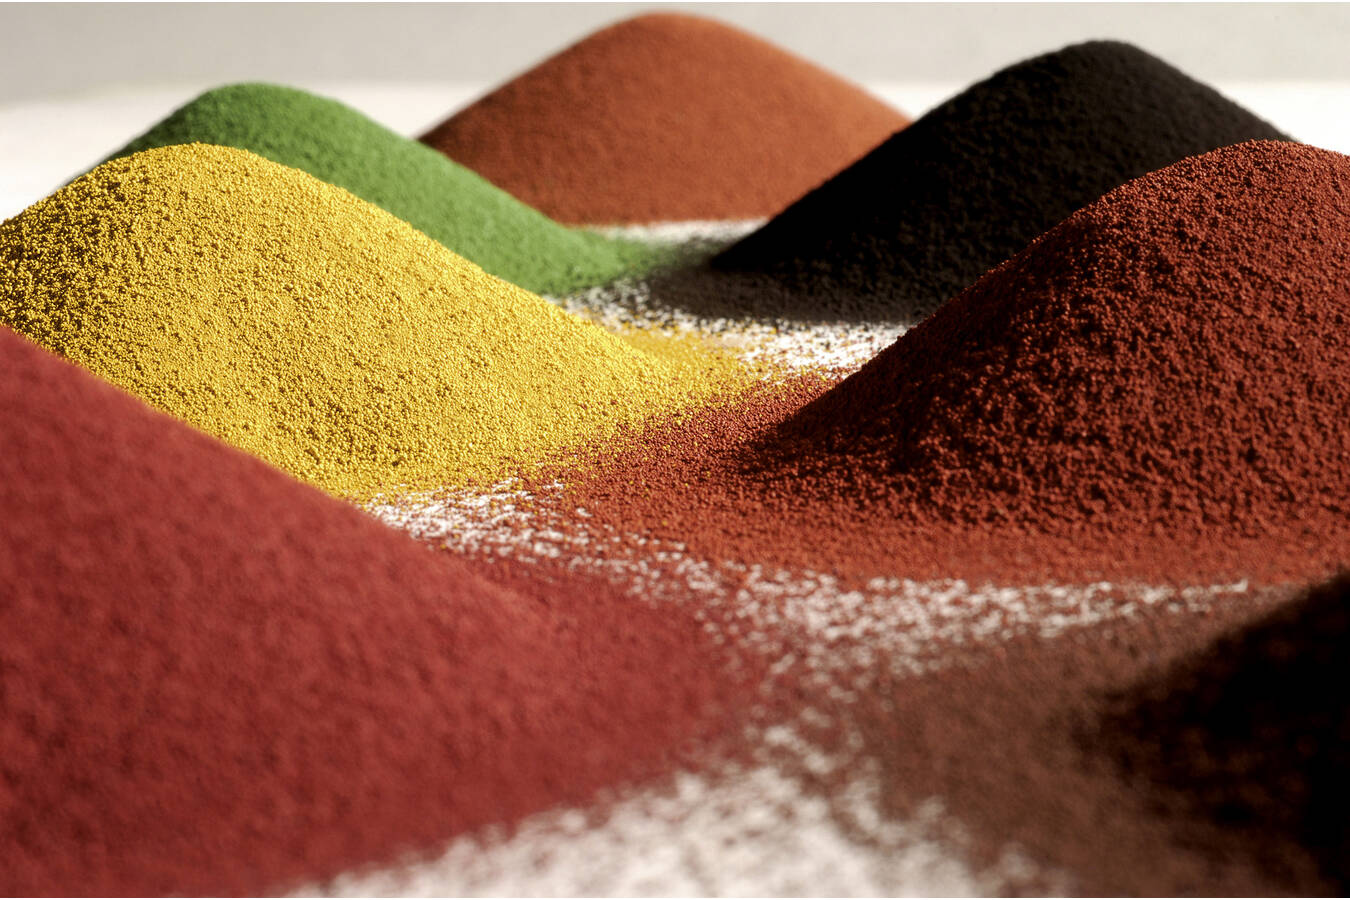 Lanxess increases prices for inorganic pigments Specialty chemical company LANXESS is raising its prices for Bayferrox iron oxide and chromium oxide pigments globally with immediate effect.